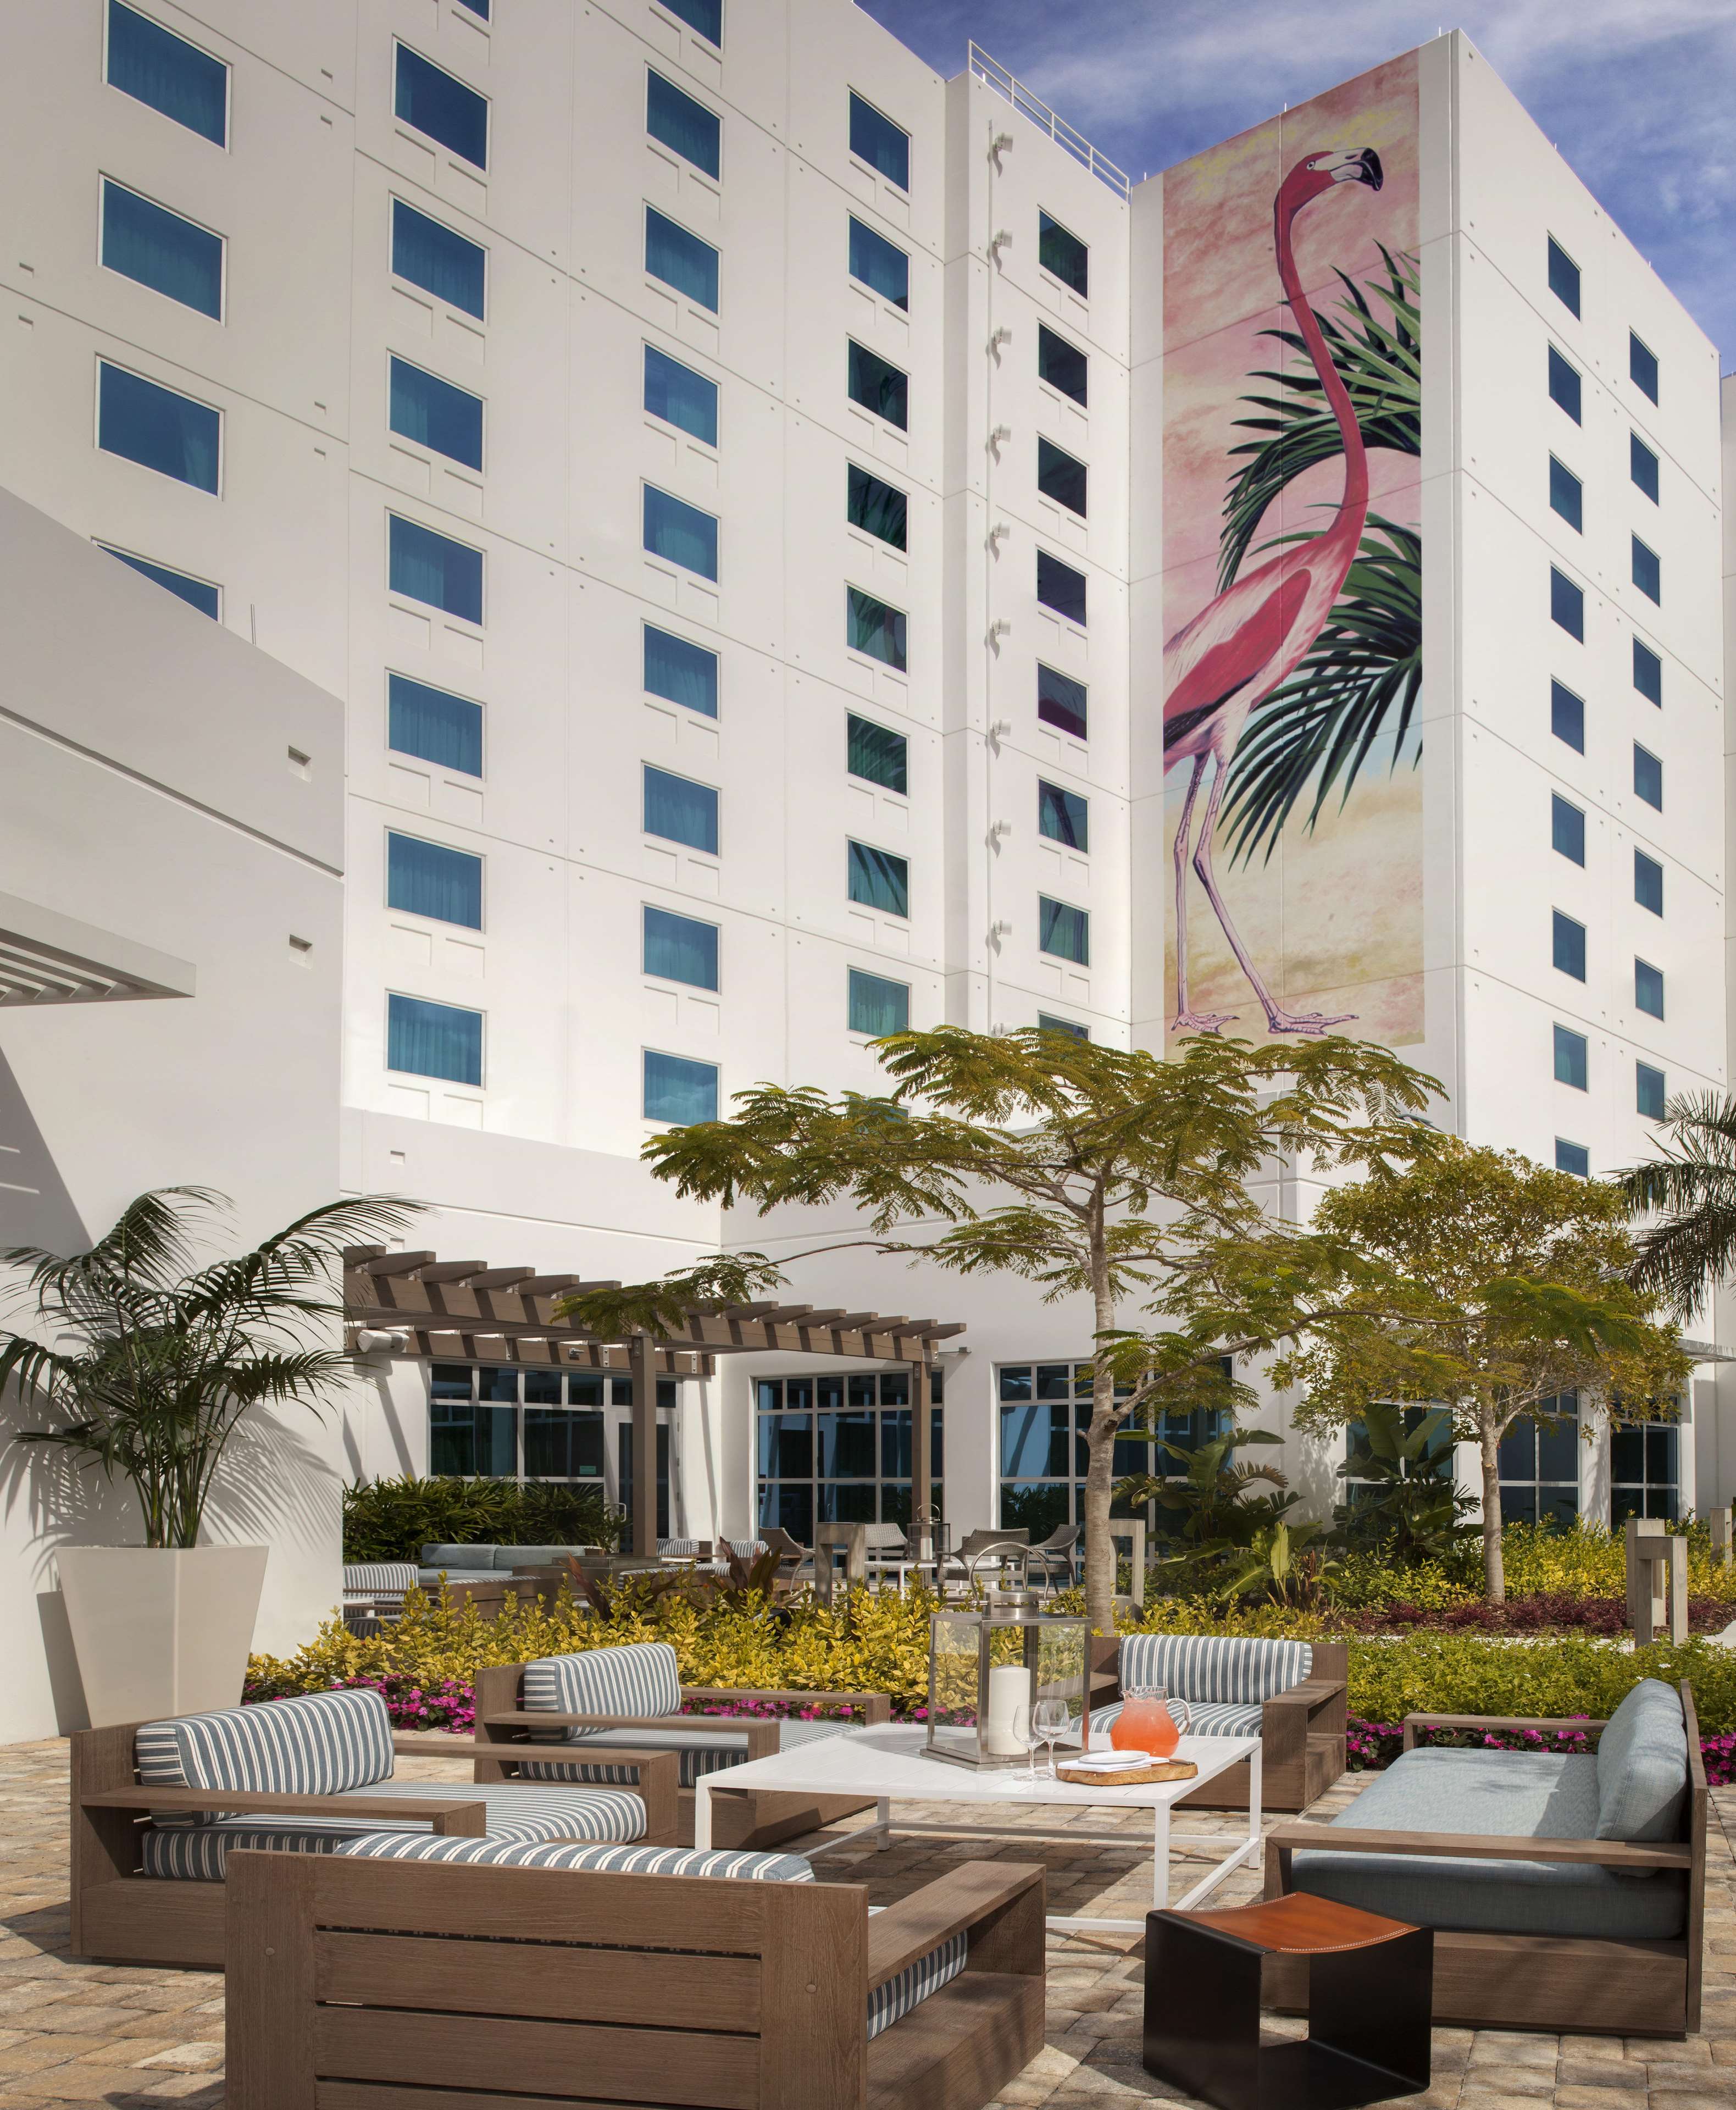 Homewood Suites by Hilton Miami Dolphin Mall Photo